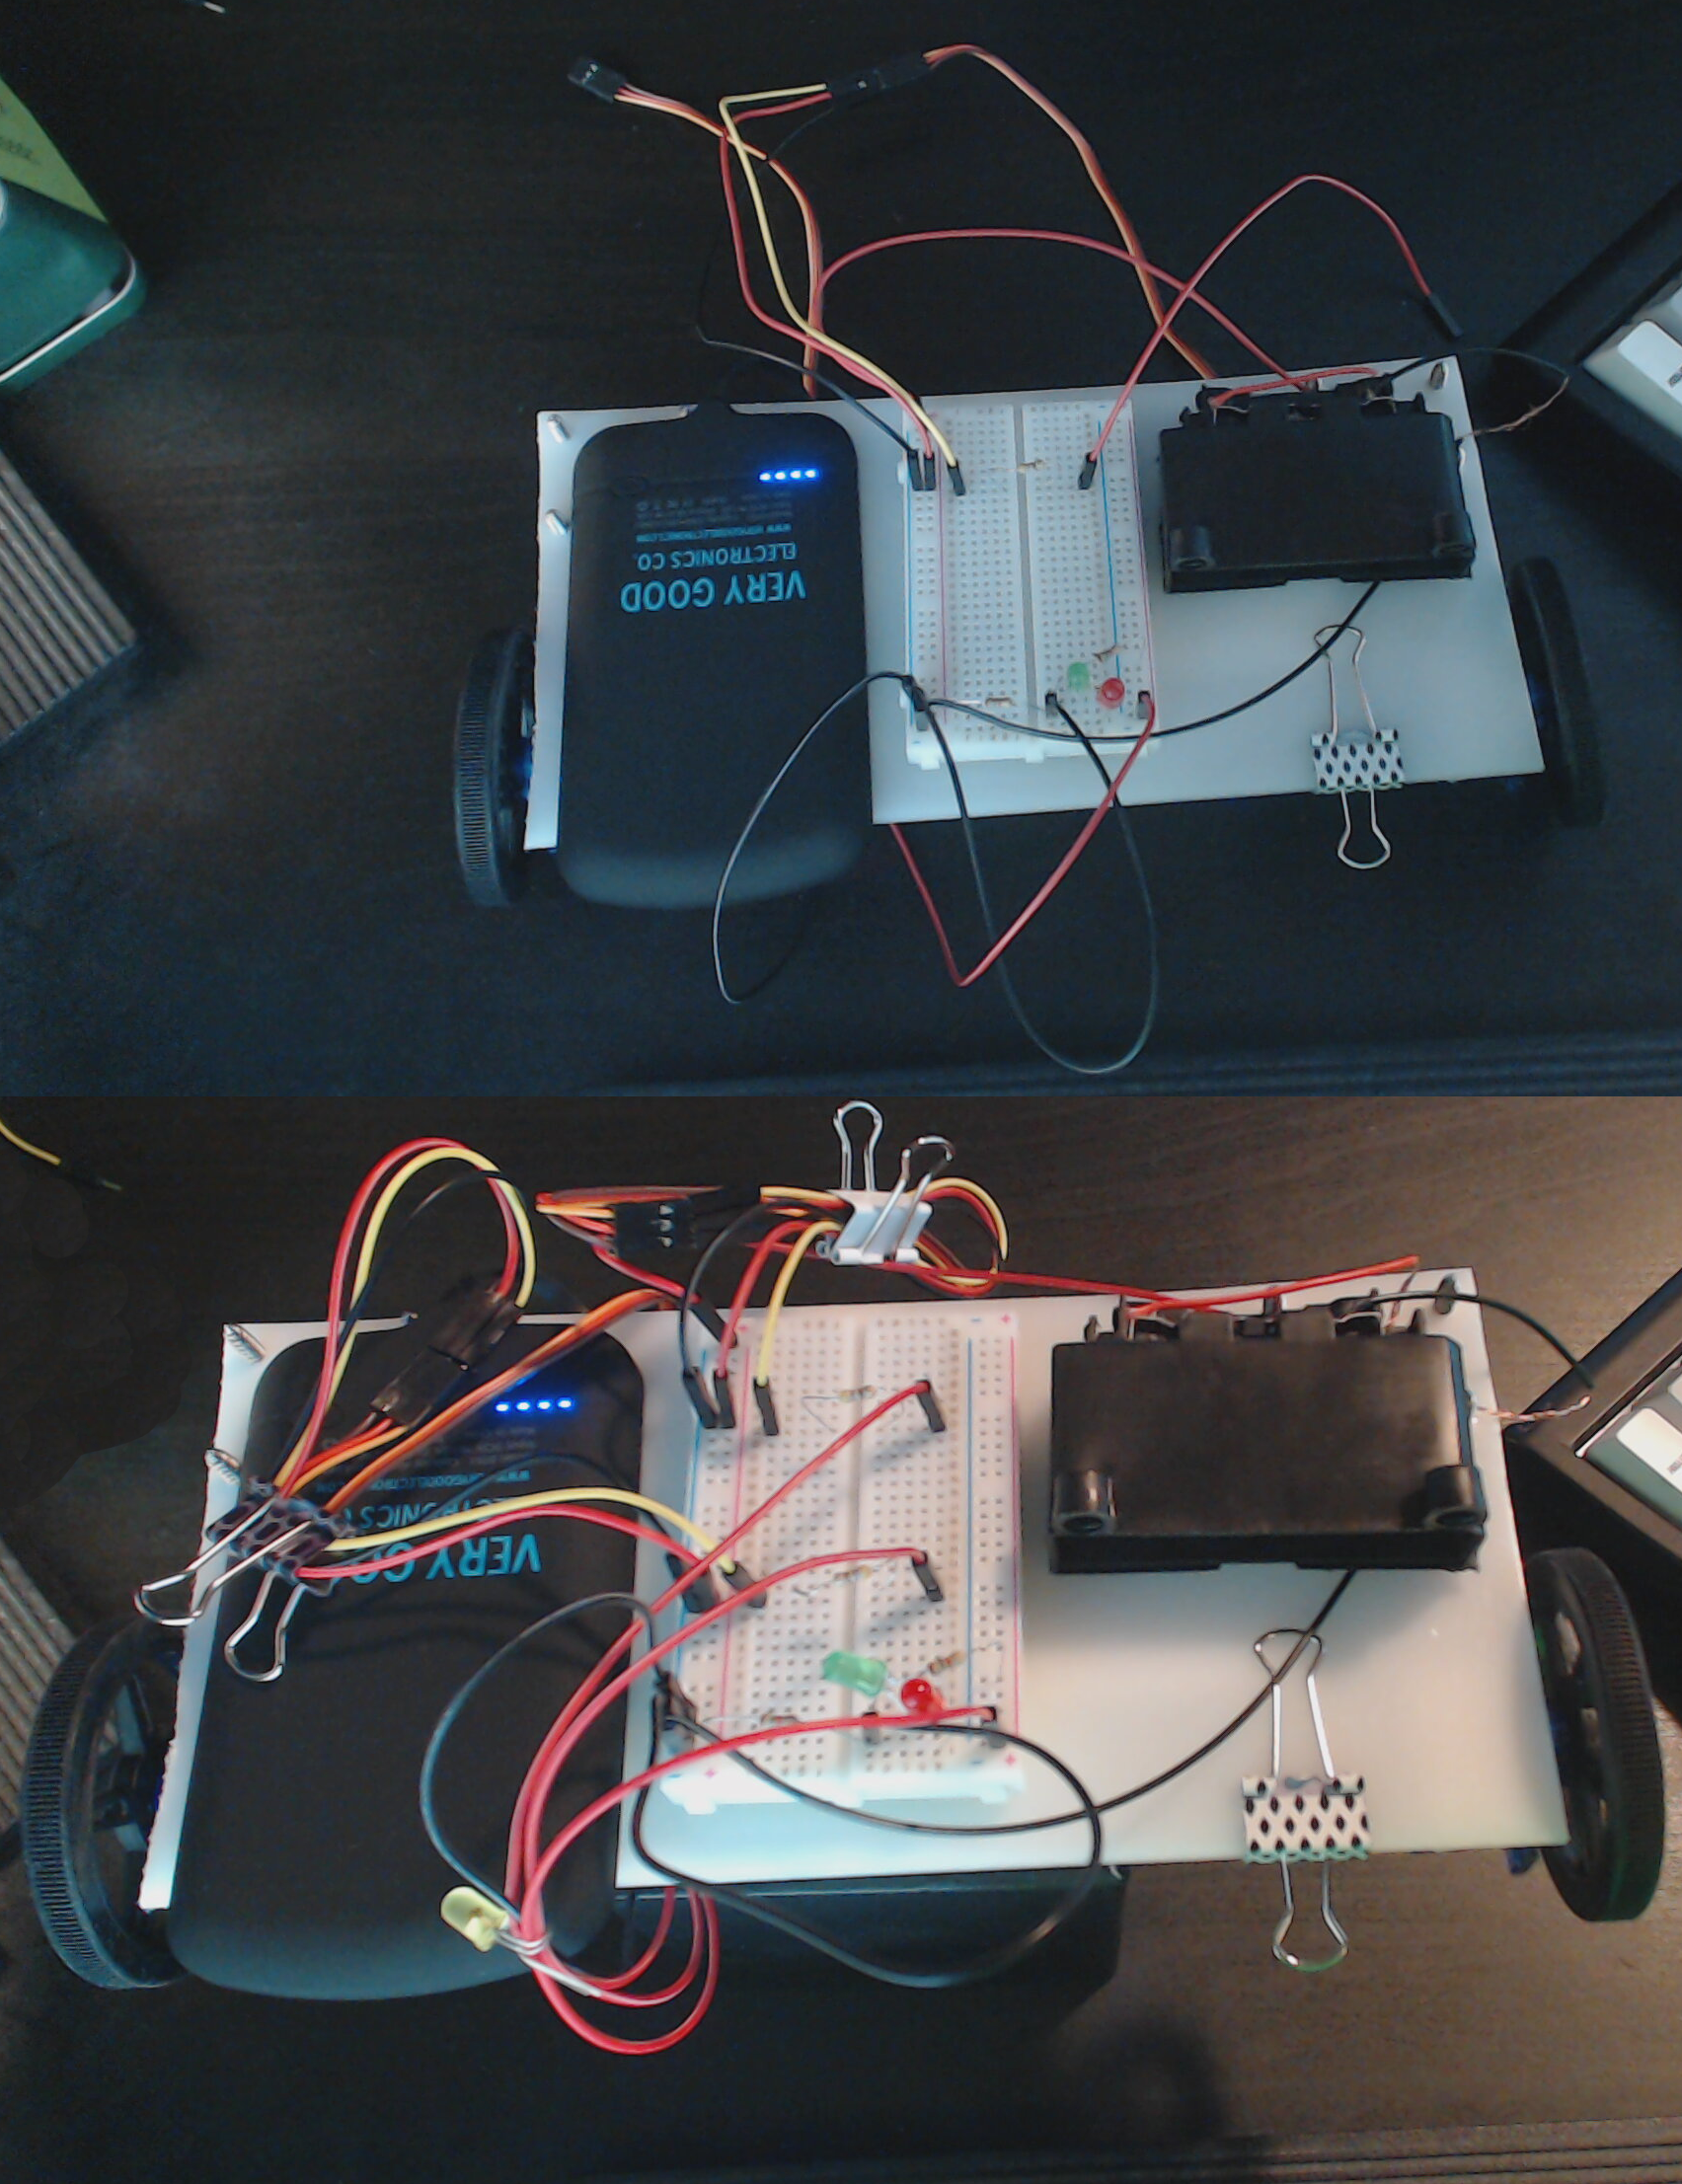 The final wiring to connect two servos into circuits connected to a Raspberry Pi via GPIO pins